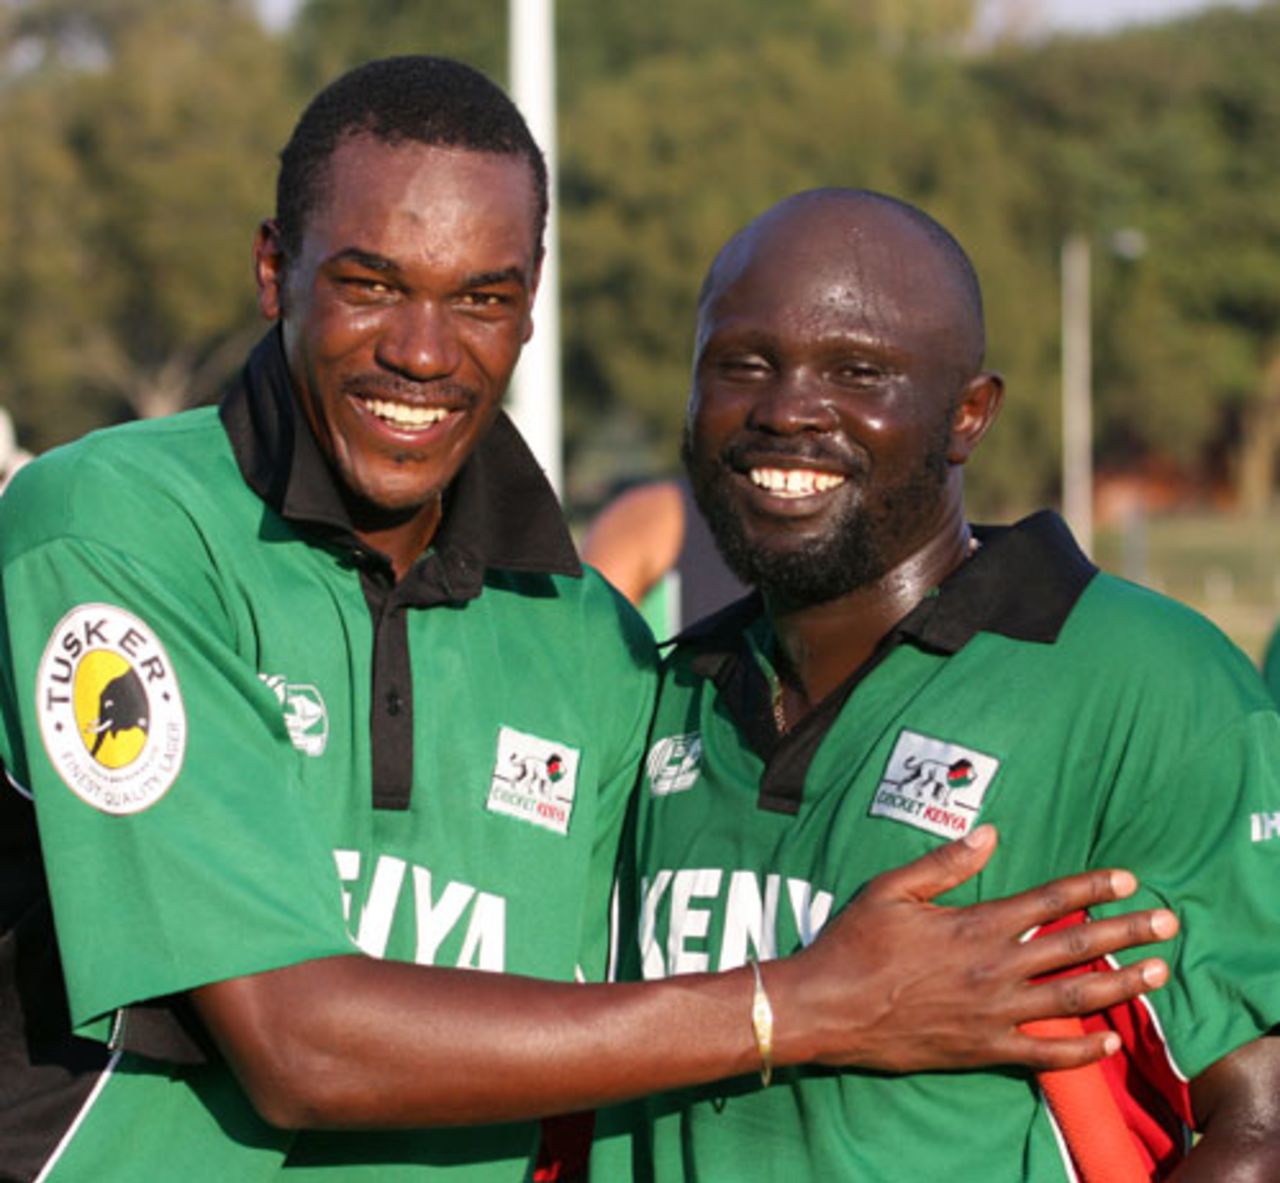 Man of the Match Collins Obuya and Thomas Odoyo, Ireland v Kenya, ICC World Cup Qualifiers, April 17, 2009 